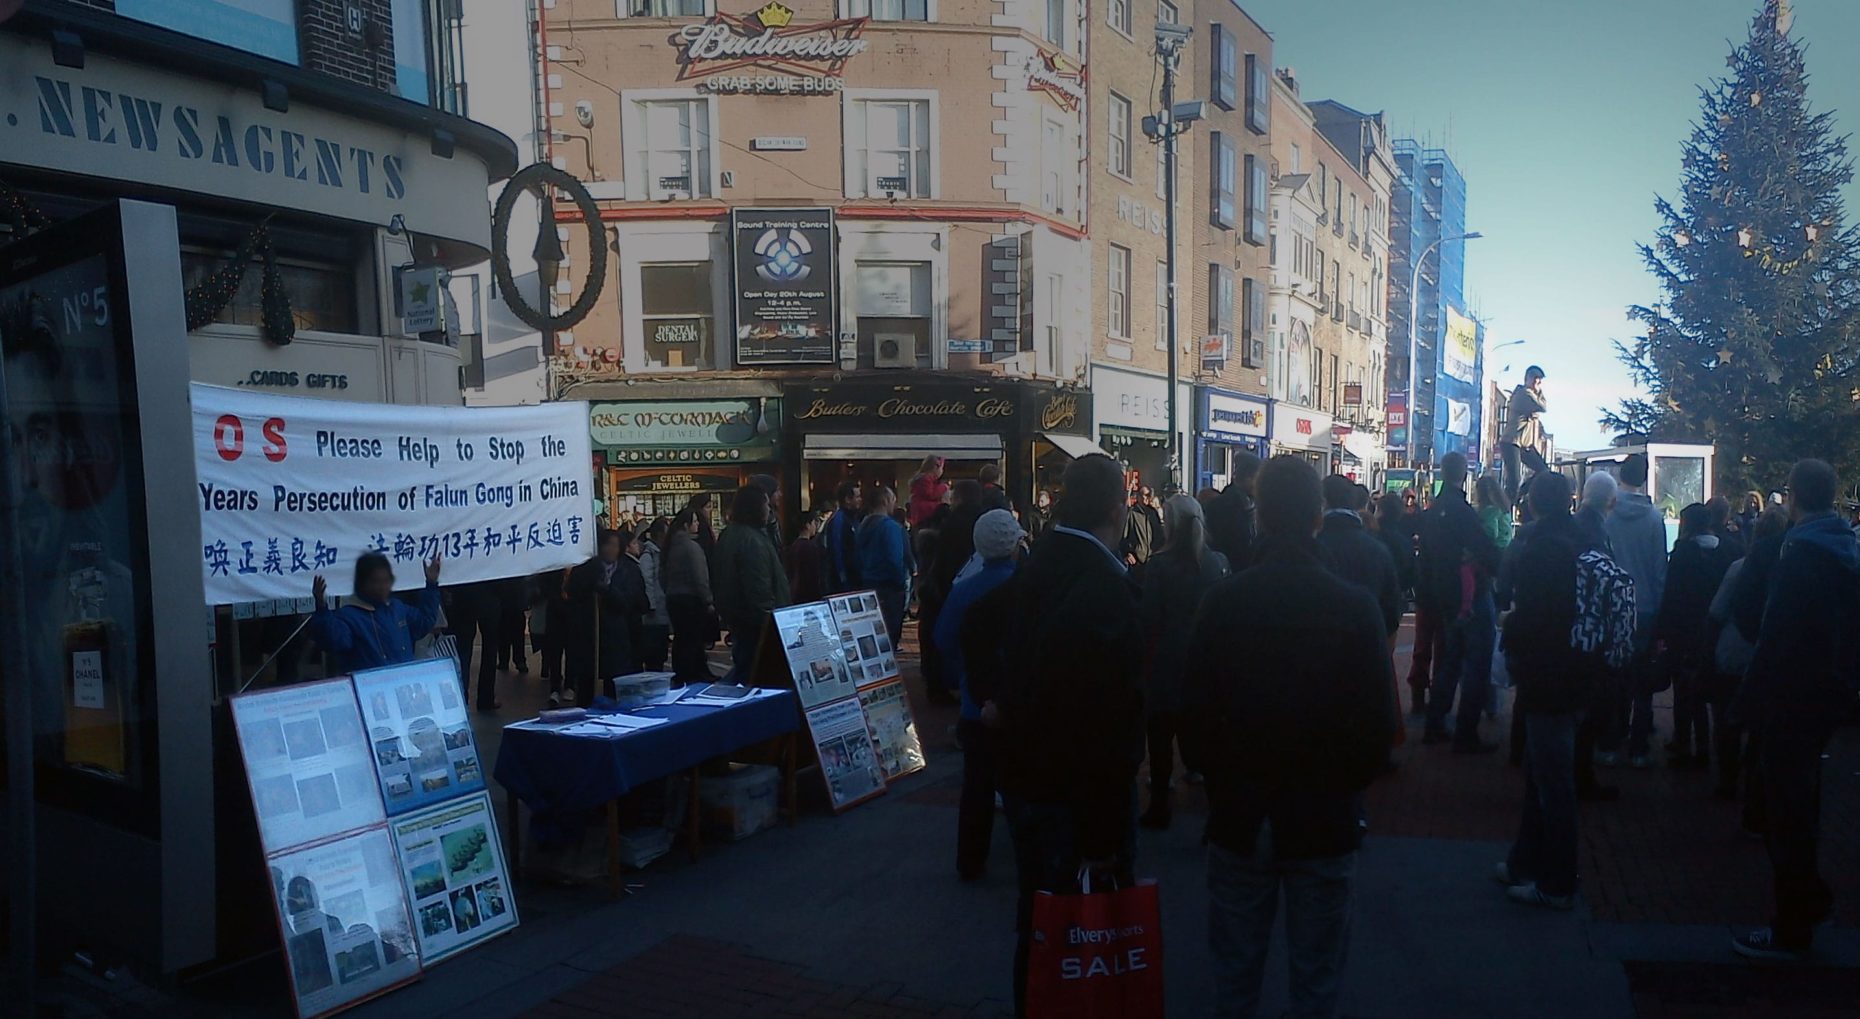 Escape artist and Falun Gong practitioners on Grafton Street.